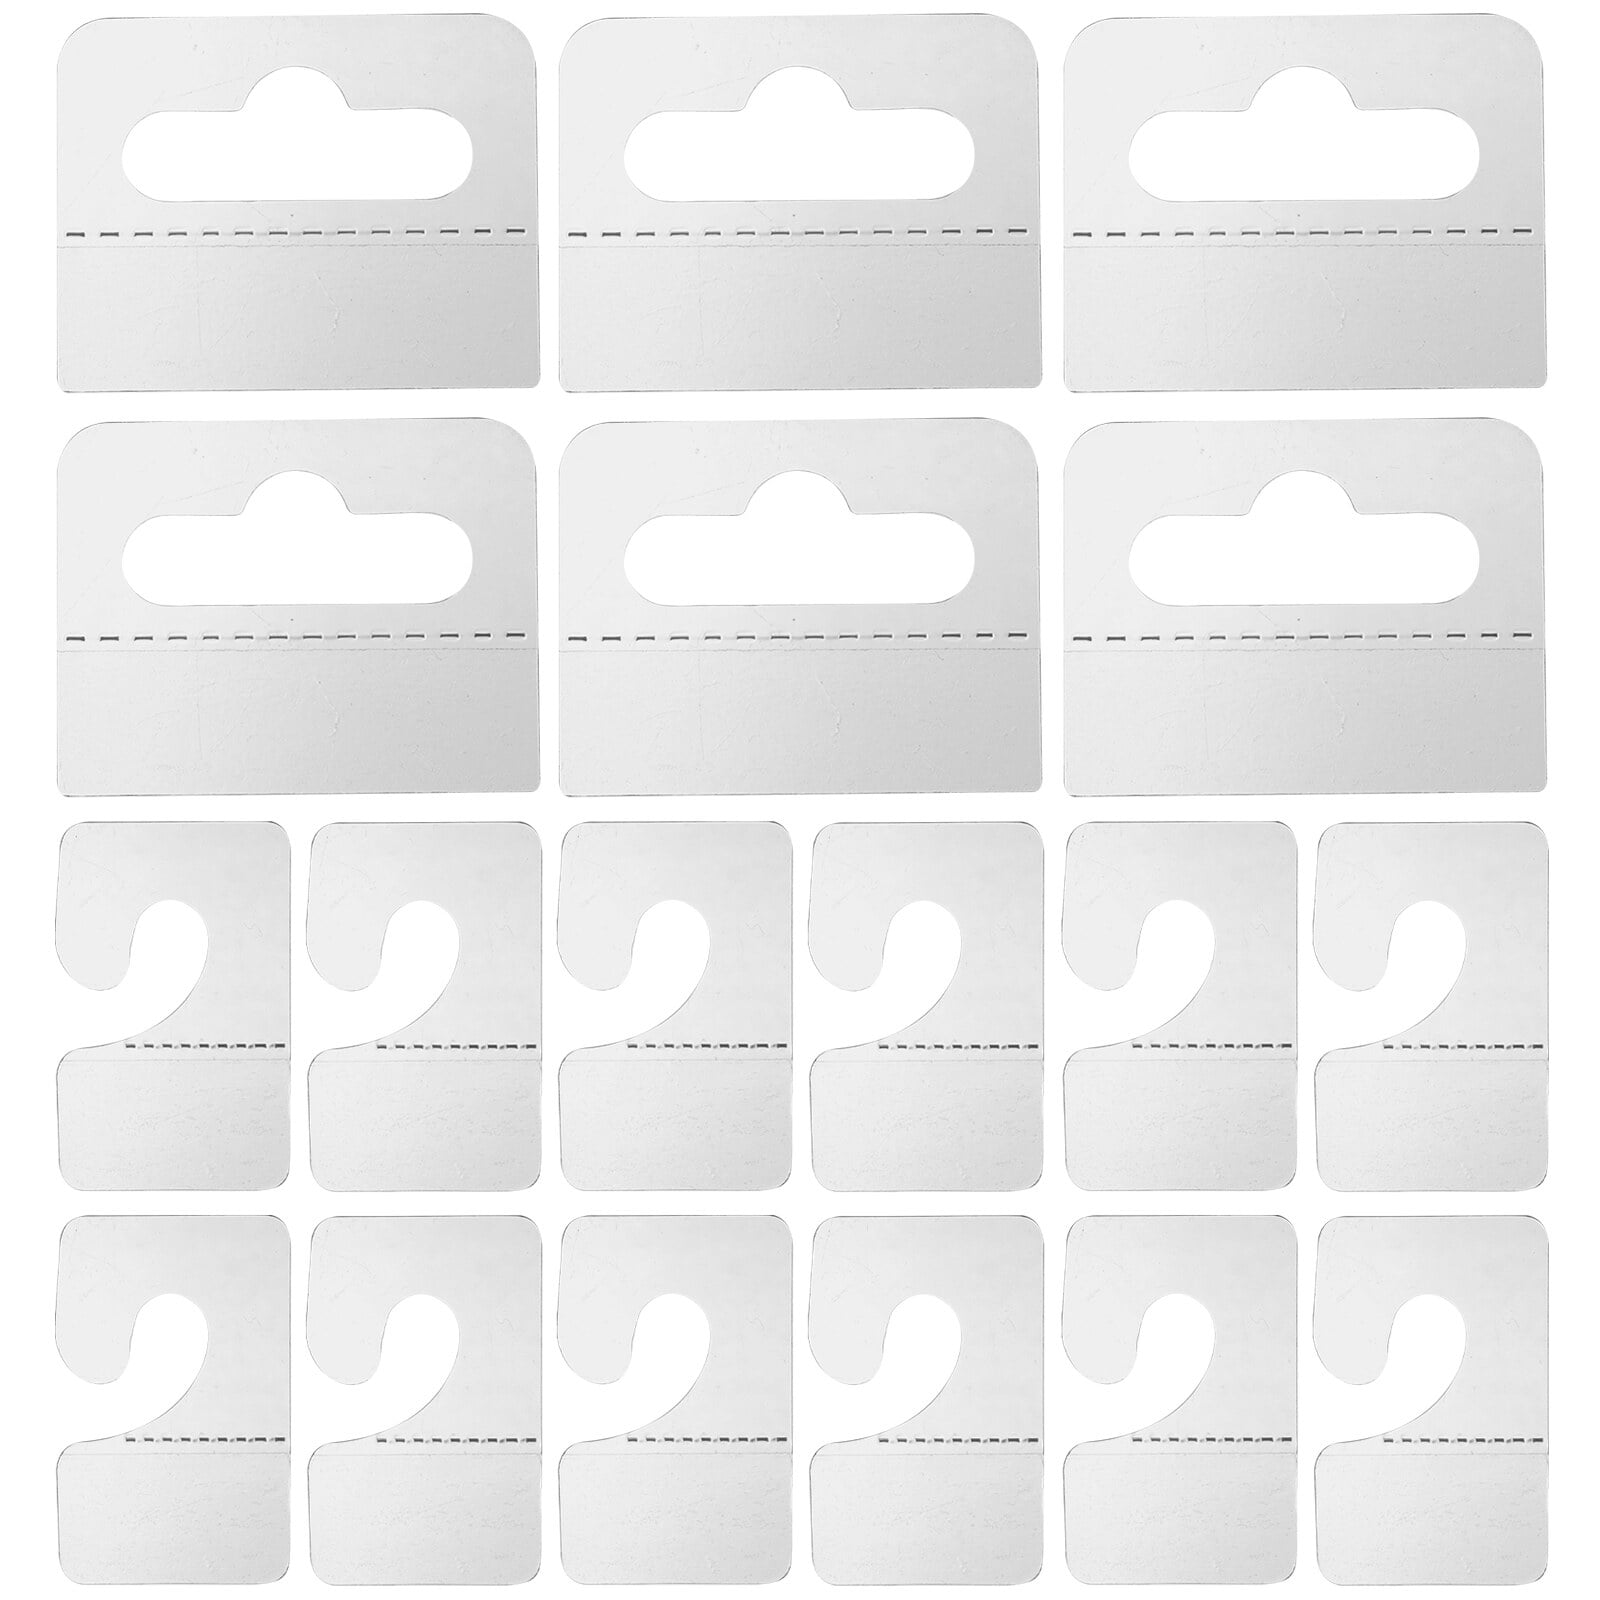 MAGICLULU 200pcs Transparent Round Hole Hook Plastic Pegboard Plastic Hooks  for Hanging Product Labels Clear